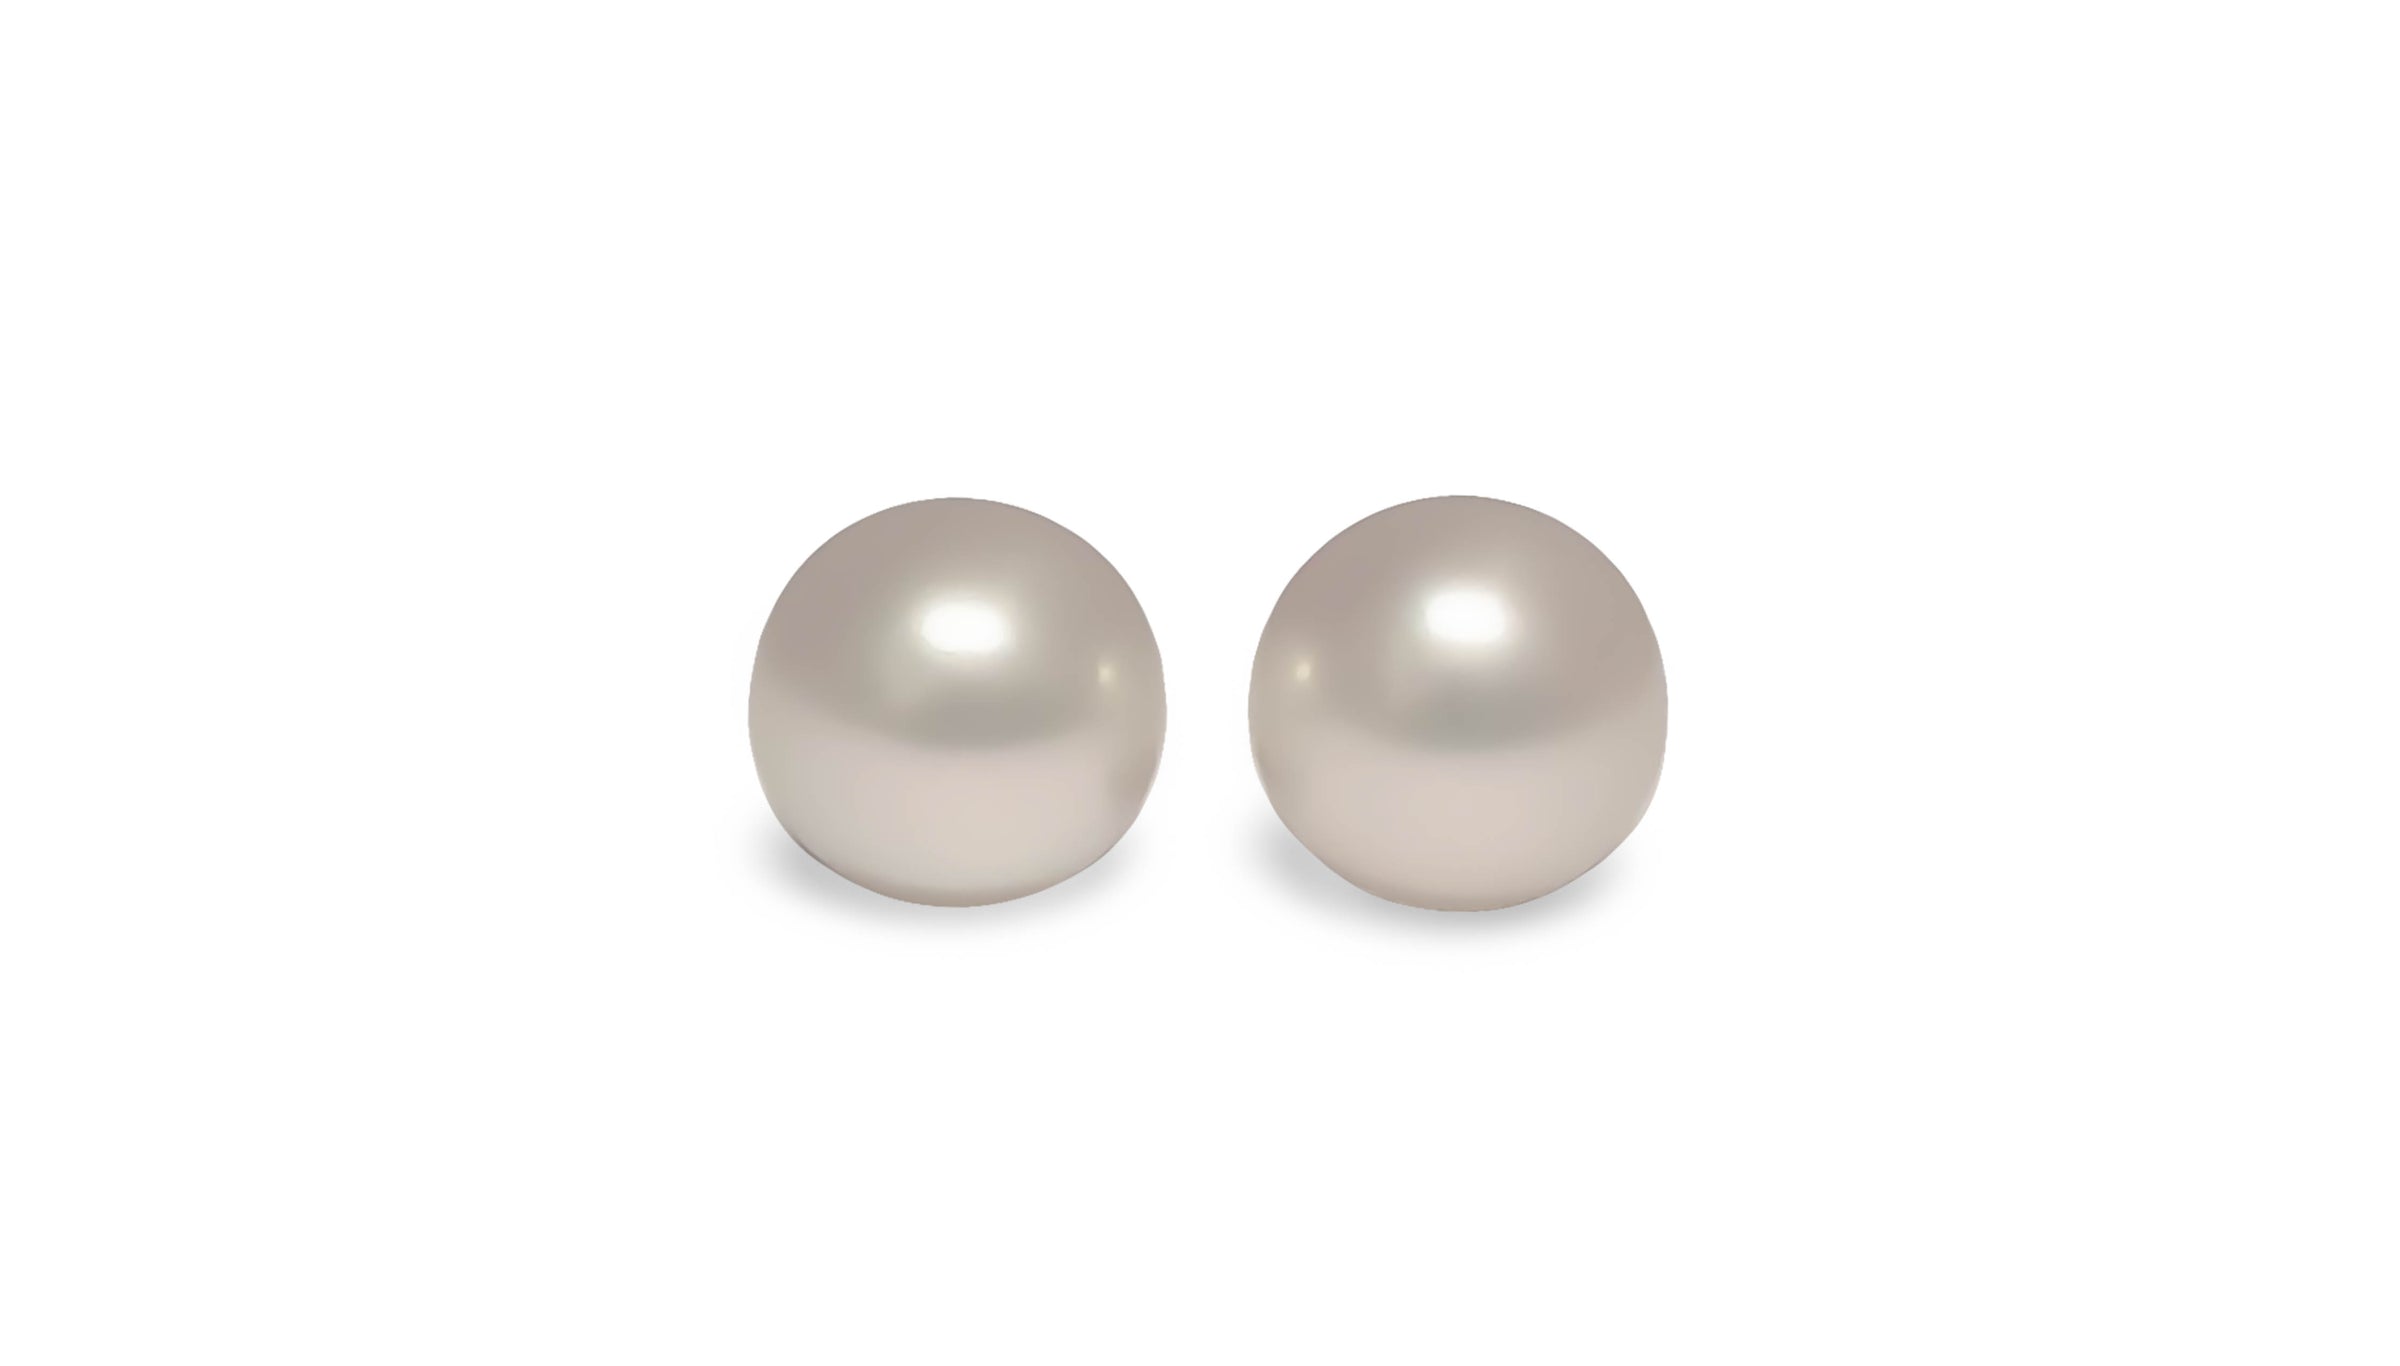 A pair of round white south sea pearls are displayed on a white background.